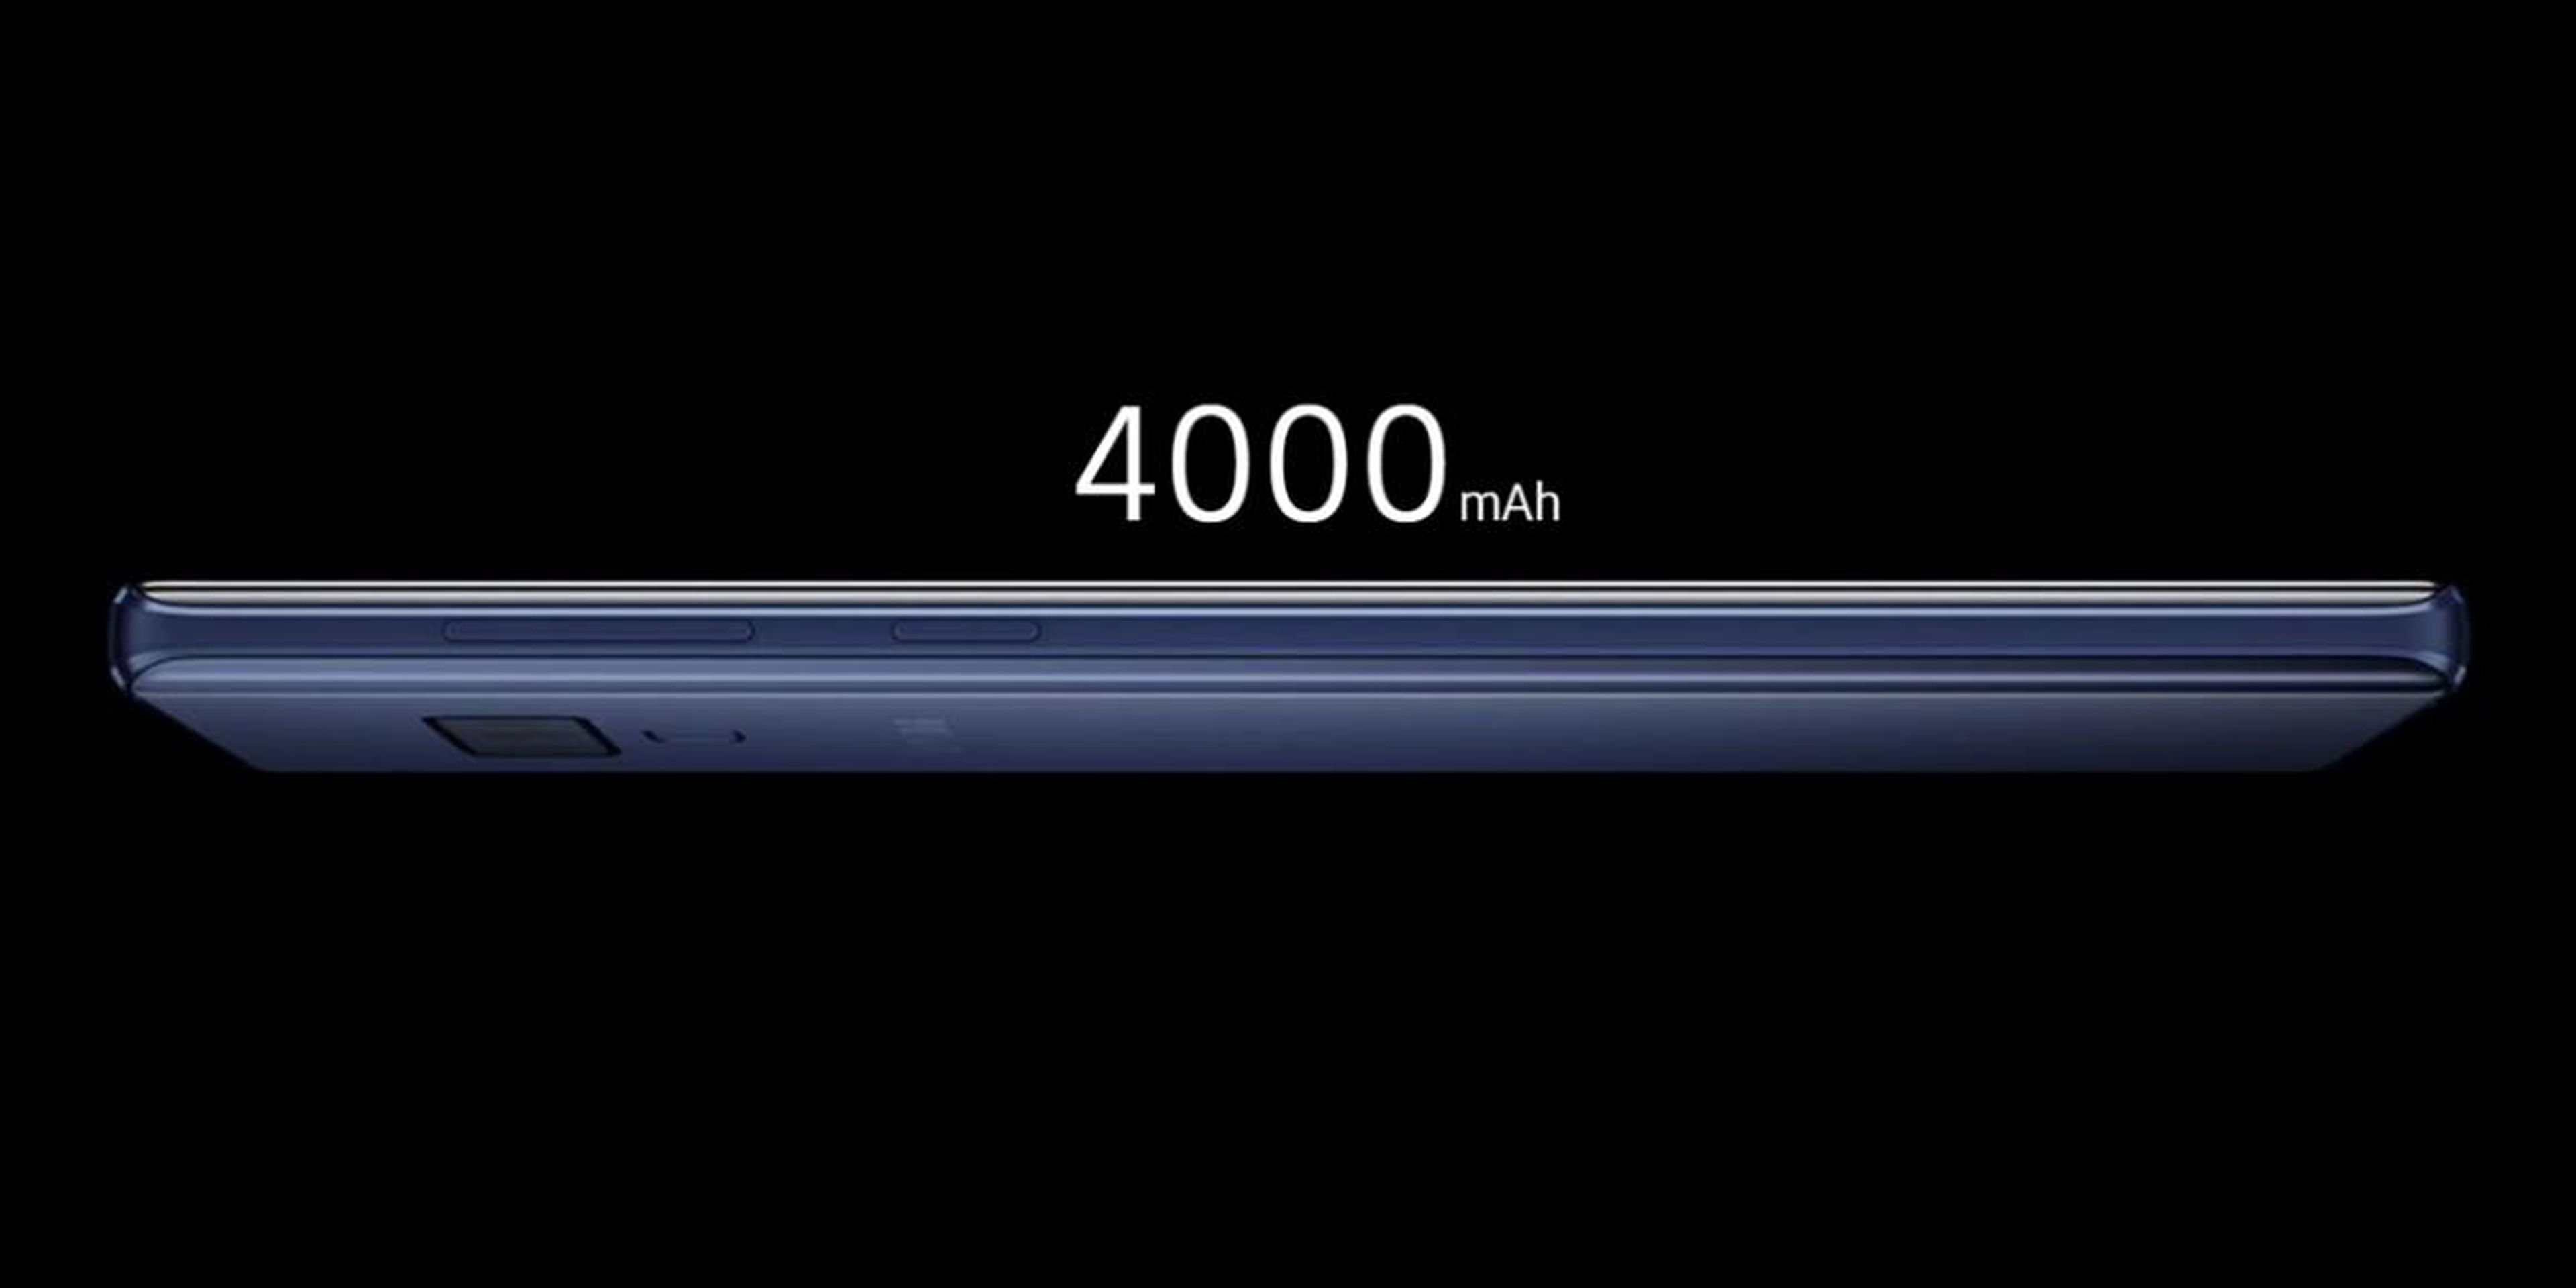 The Galaxy Note 9 has a significantly bigger battery that should last longer than the iPhone X.